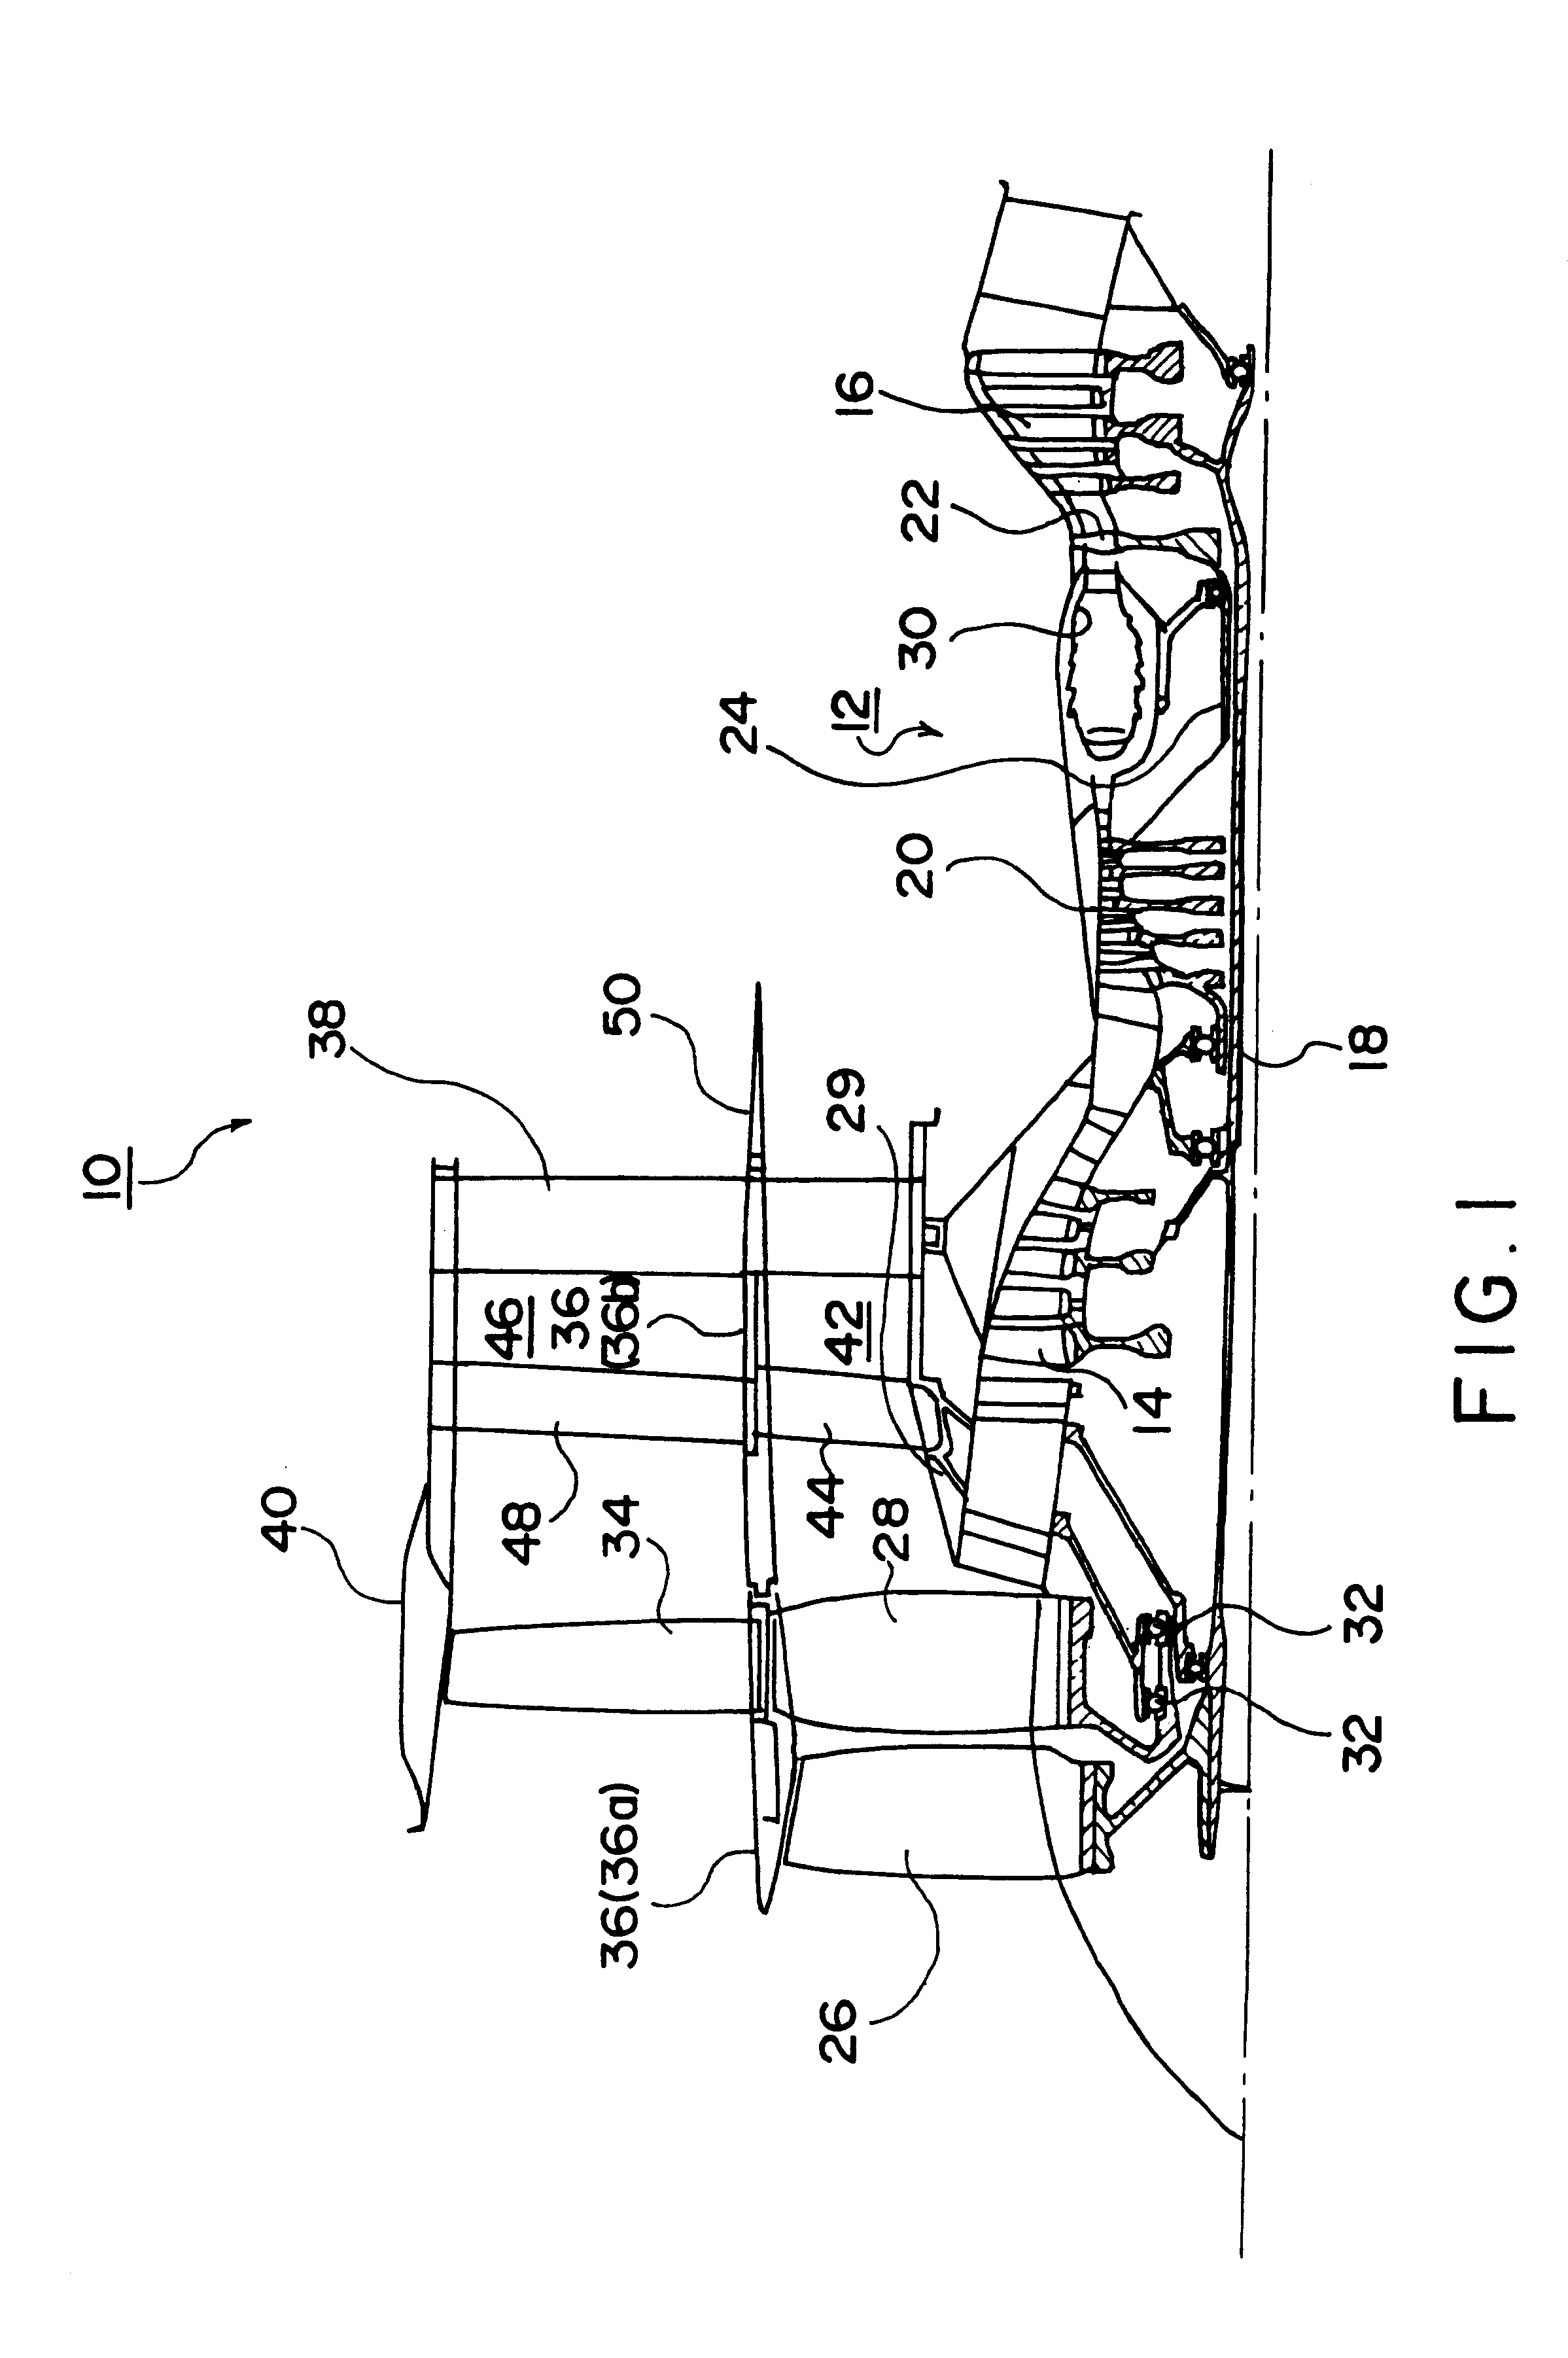 Turbofan engine including fans with reduced speed